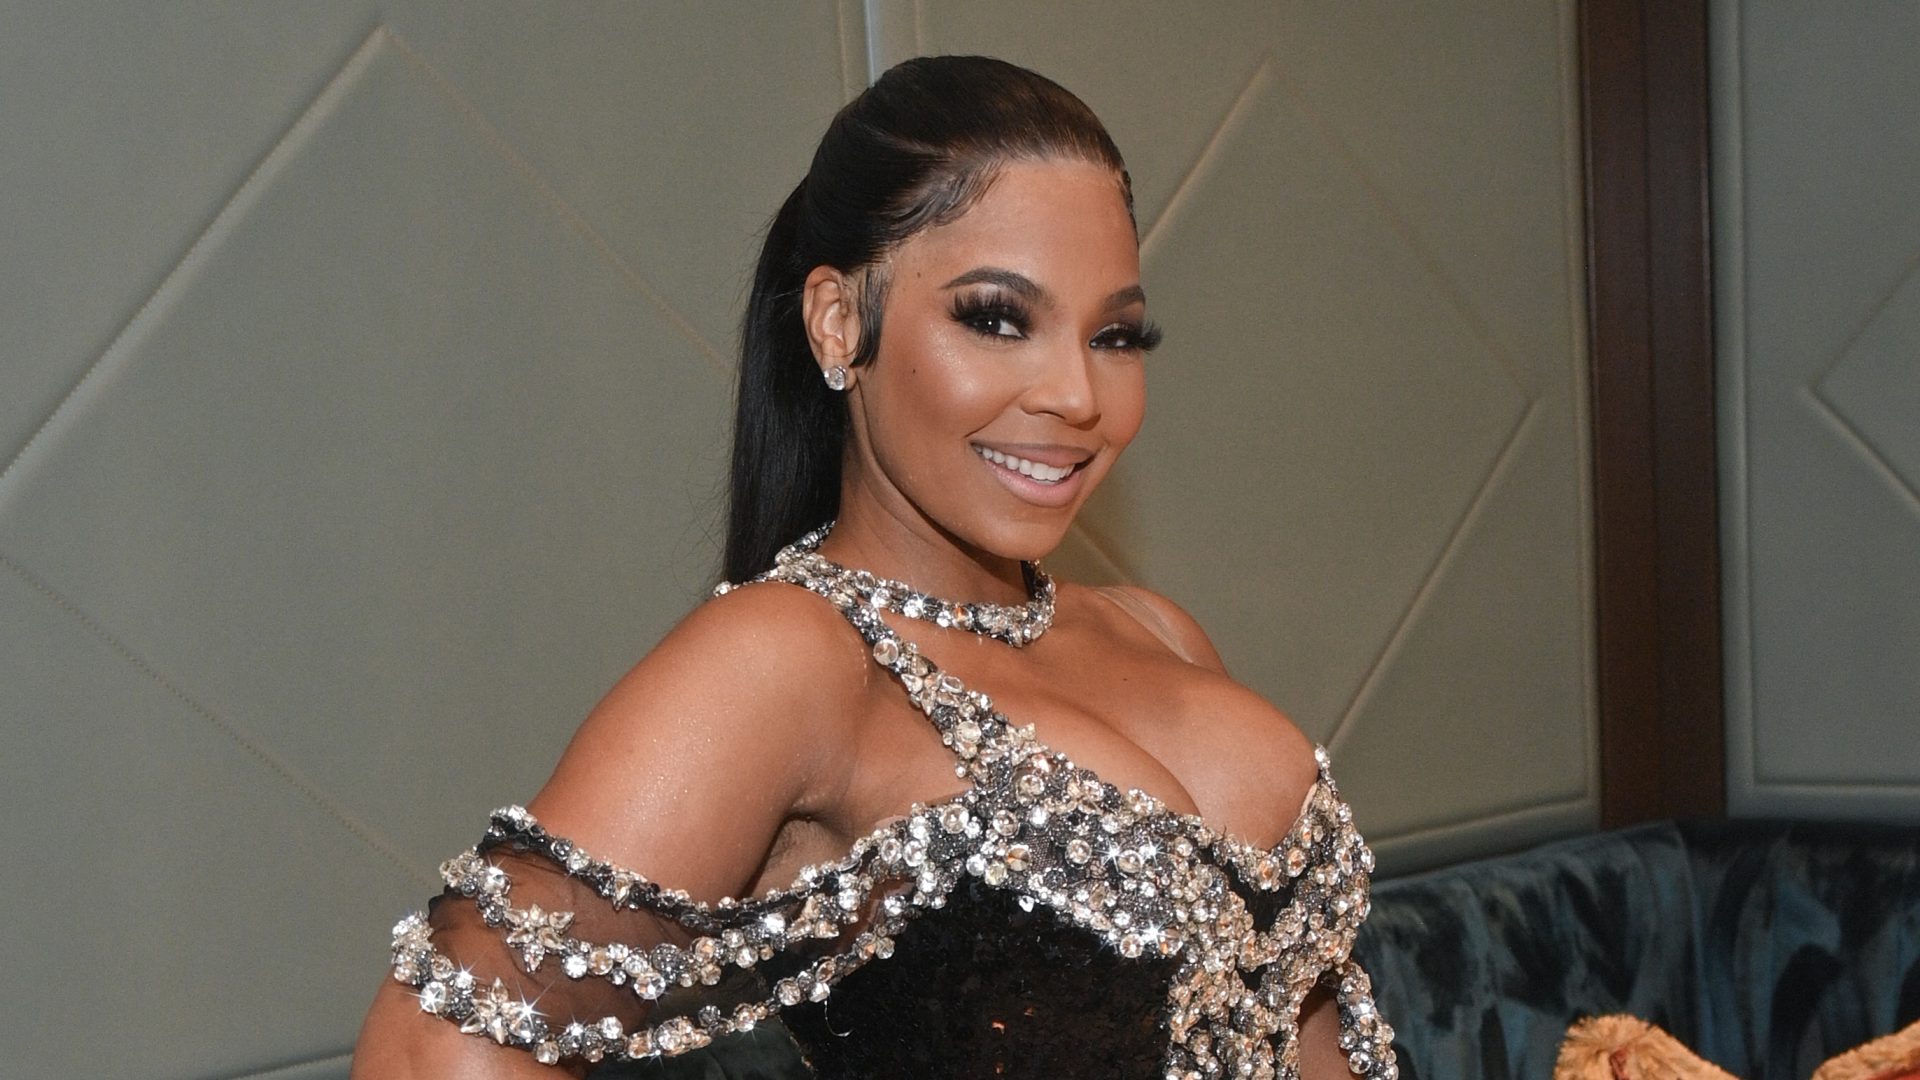 Shes A Muva Ashanti Gives Fans A Closer Look At Her Baby Bump VIDEOS scaled